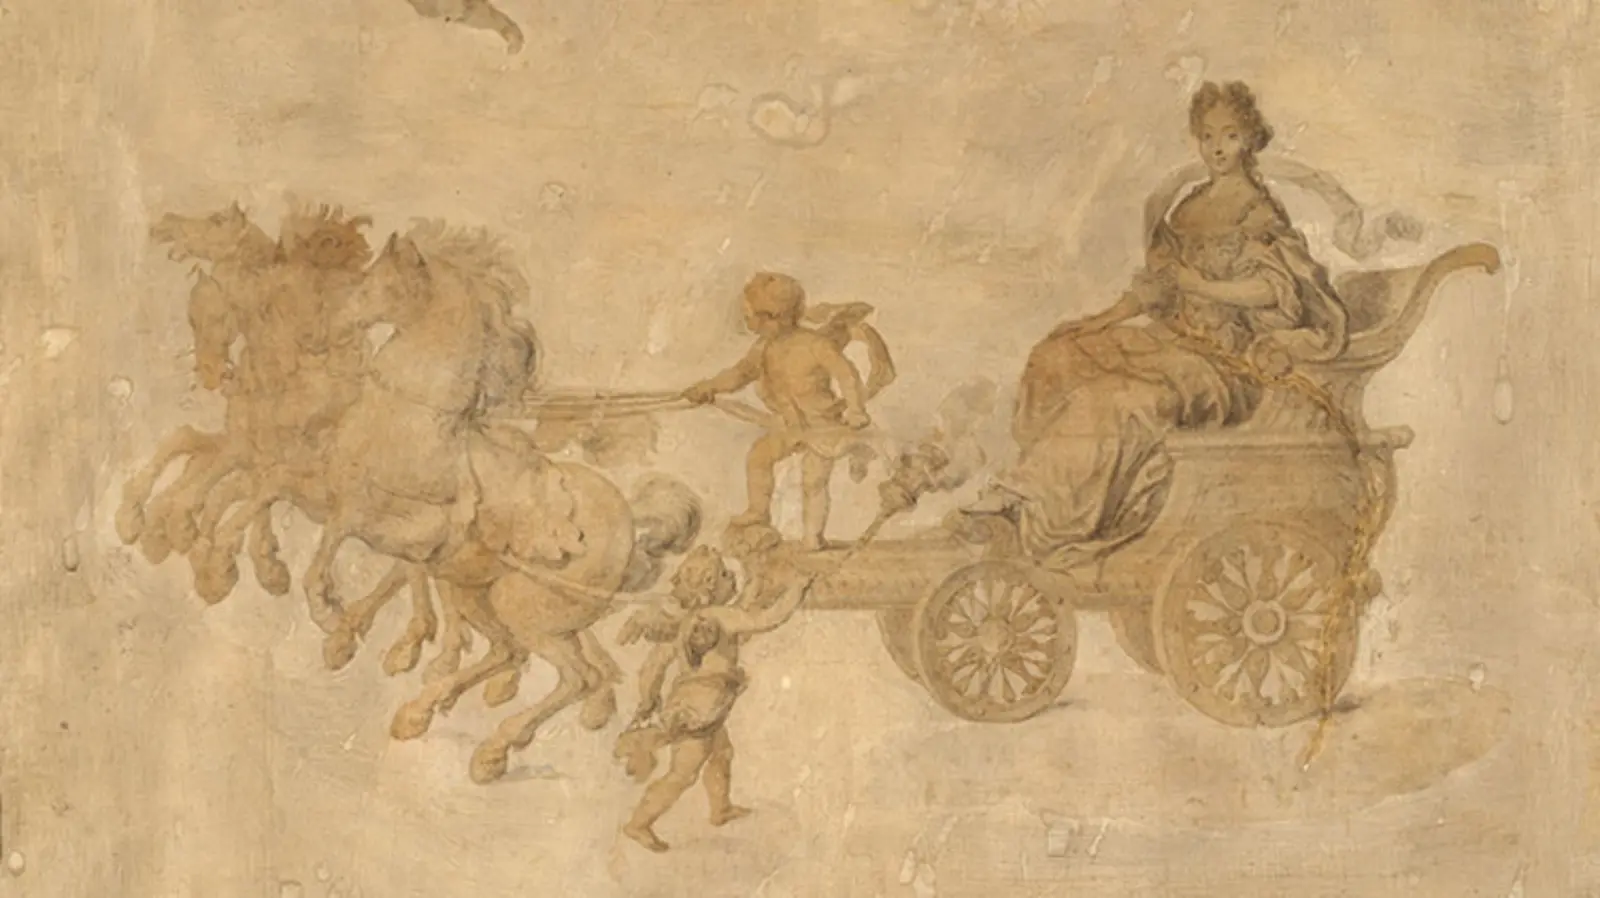 Marie Anne Christine on a horse-drawn carriage with the assistance of cherubs.